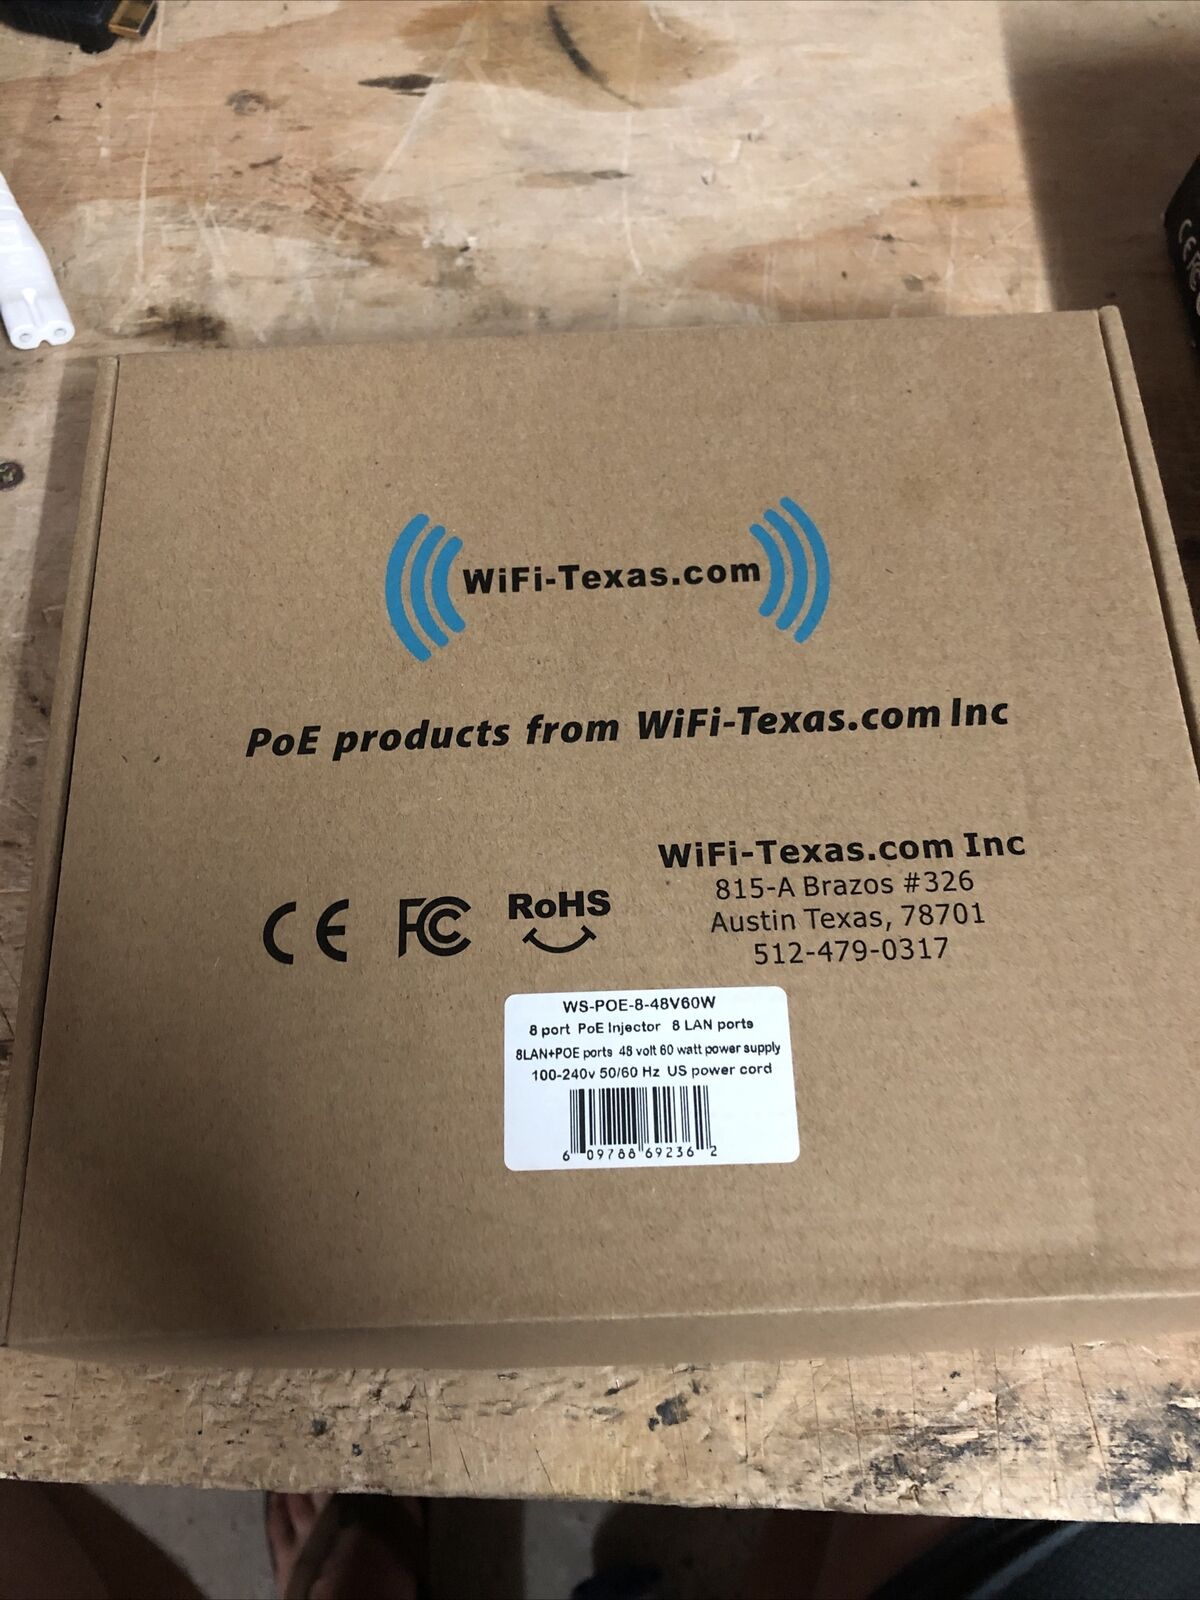 Wifi-Texas WS-POE-8-48V60W POE INJECTOR FOR VOIP & IP CAMERAS New In Box (003)